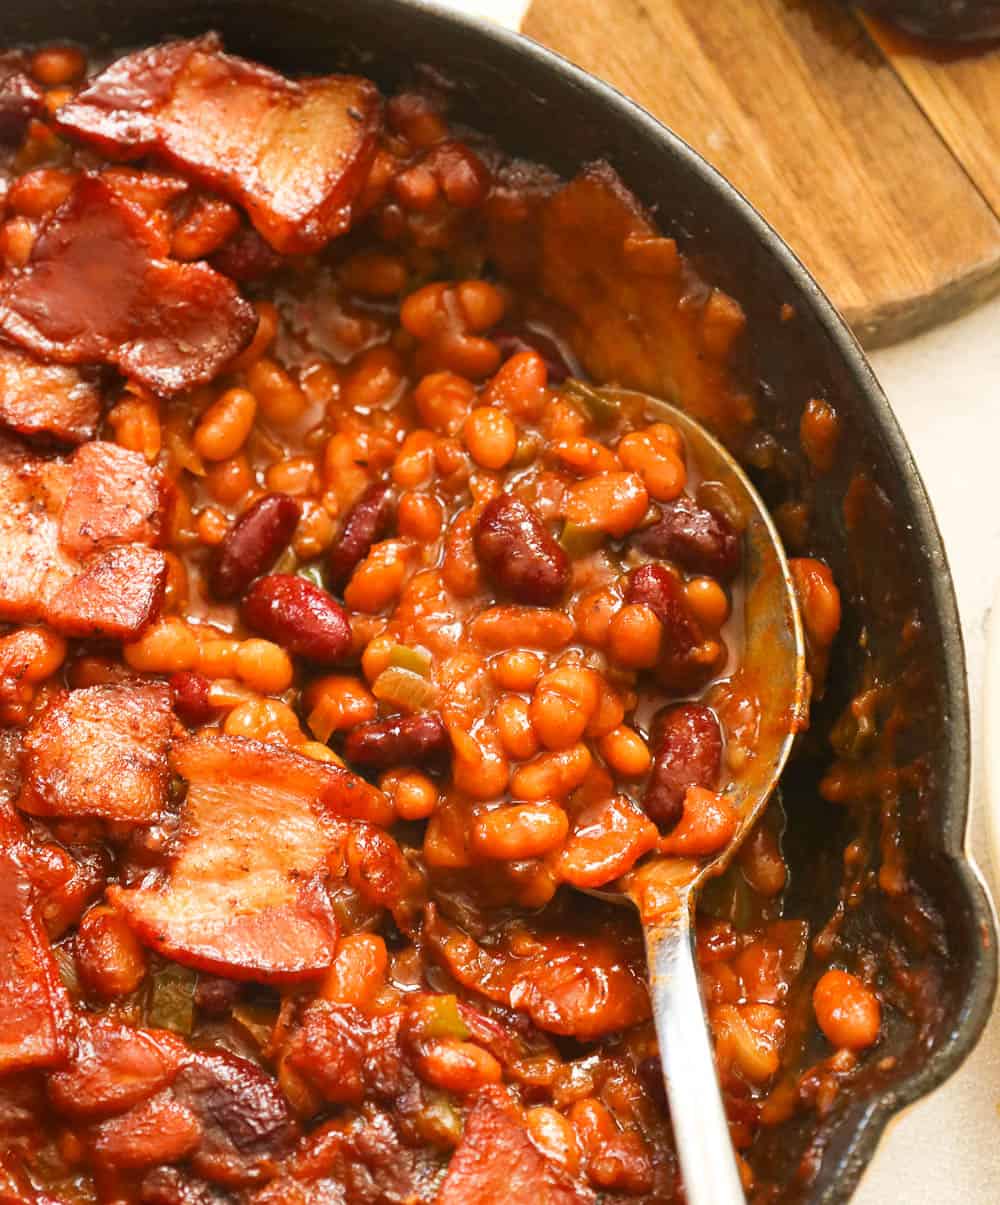 Southern Baked Beans with Bacon in a Skillet Being Spooned Out